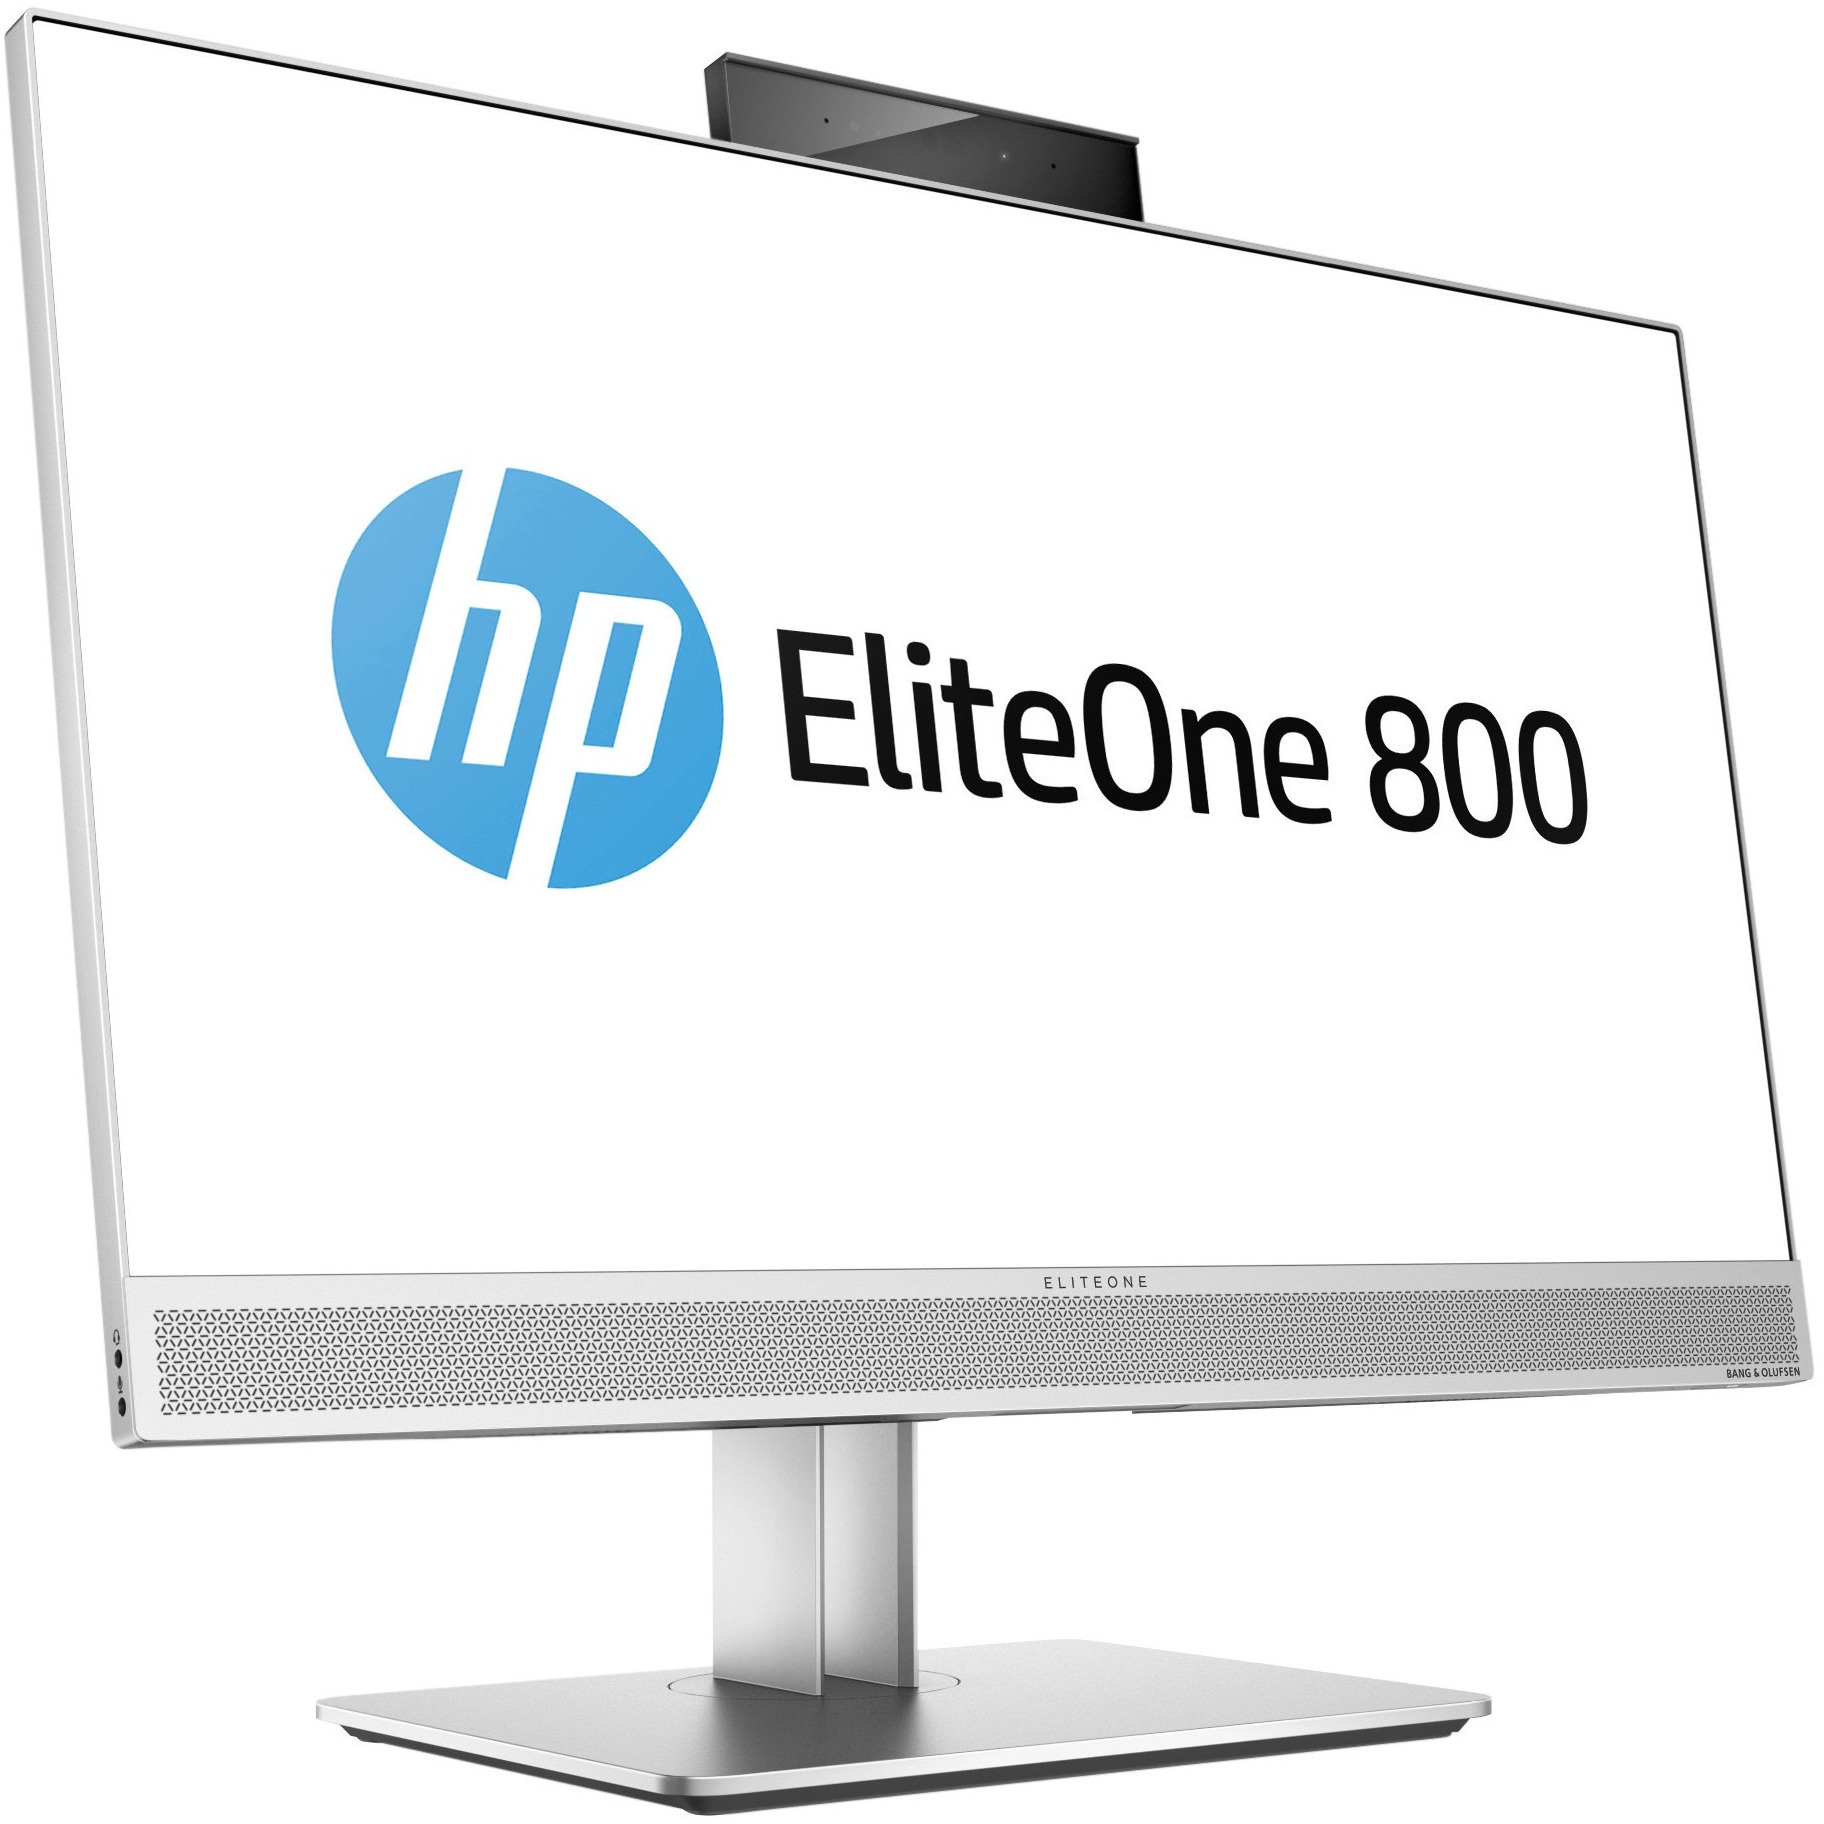 HP EliteOne 800 G4 All-in-One Computer - Core i5-8500 - 16GB RAM - 256GB SSD - 23.8" 1920 x 1080 Display - Intel UHD Graphics 630 - Windows 10 Home - image 3 of 5